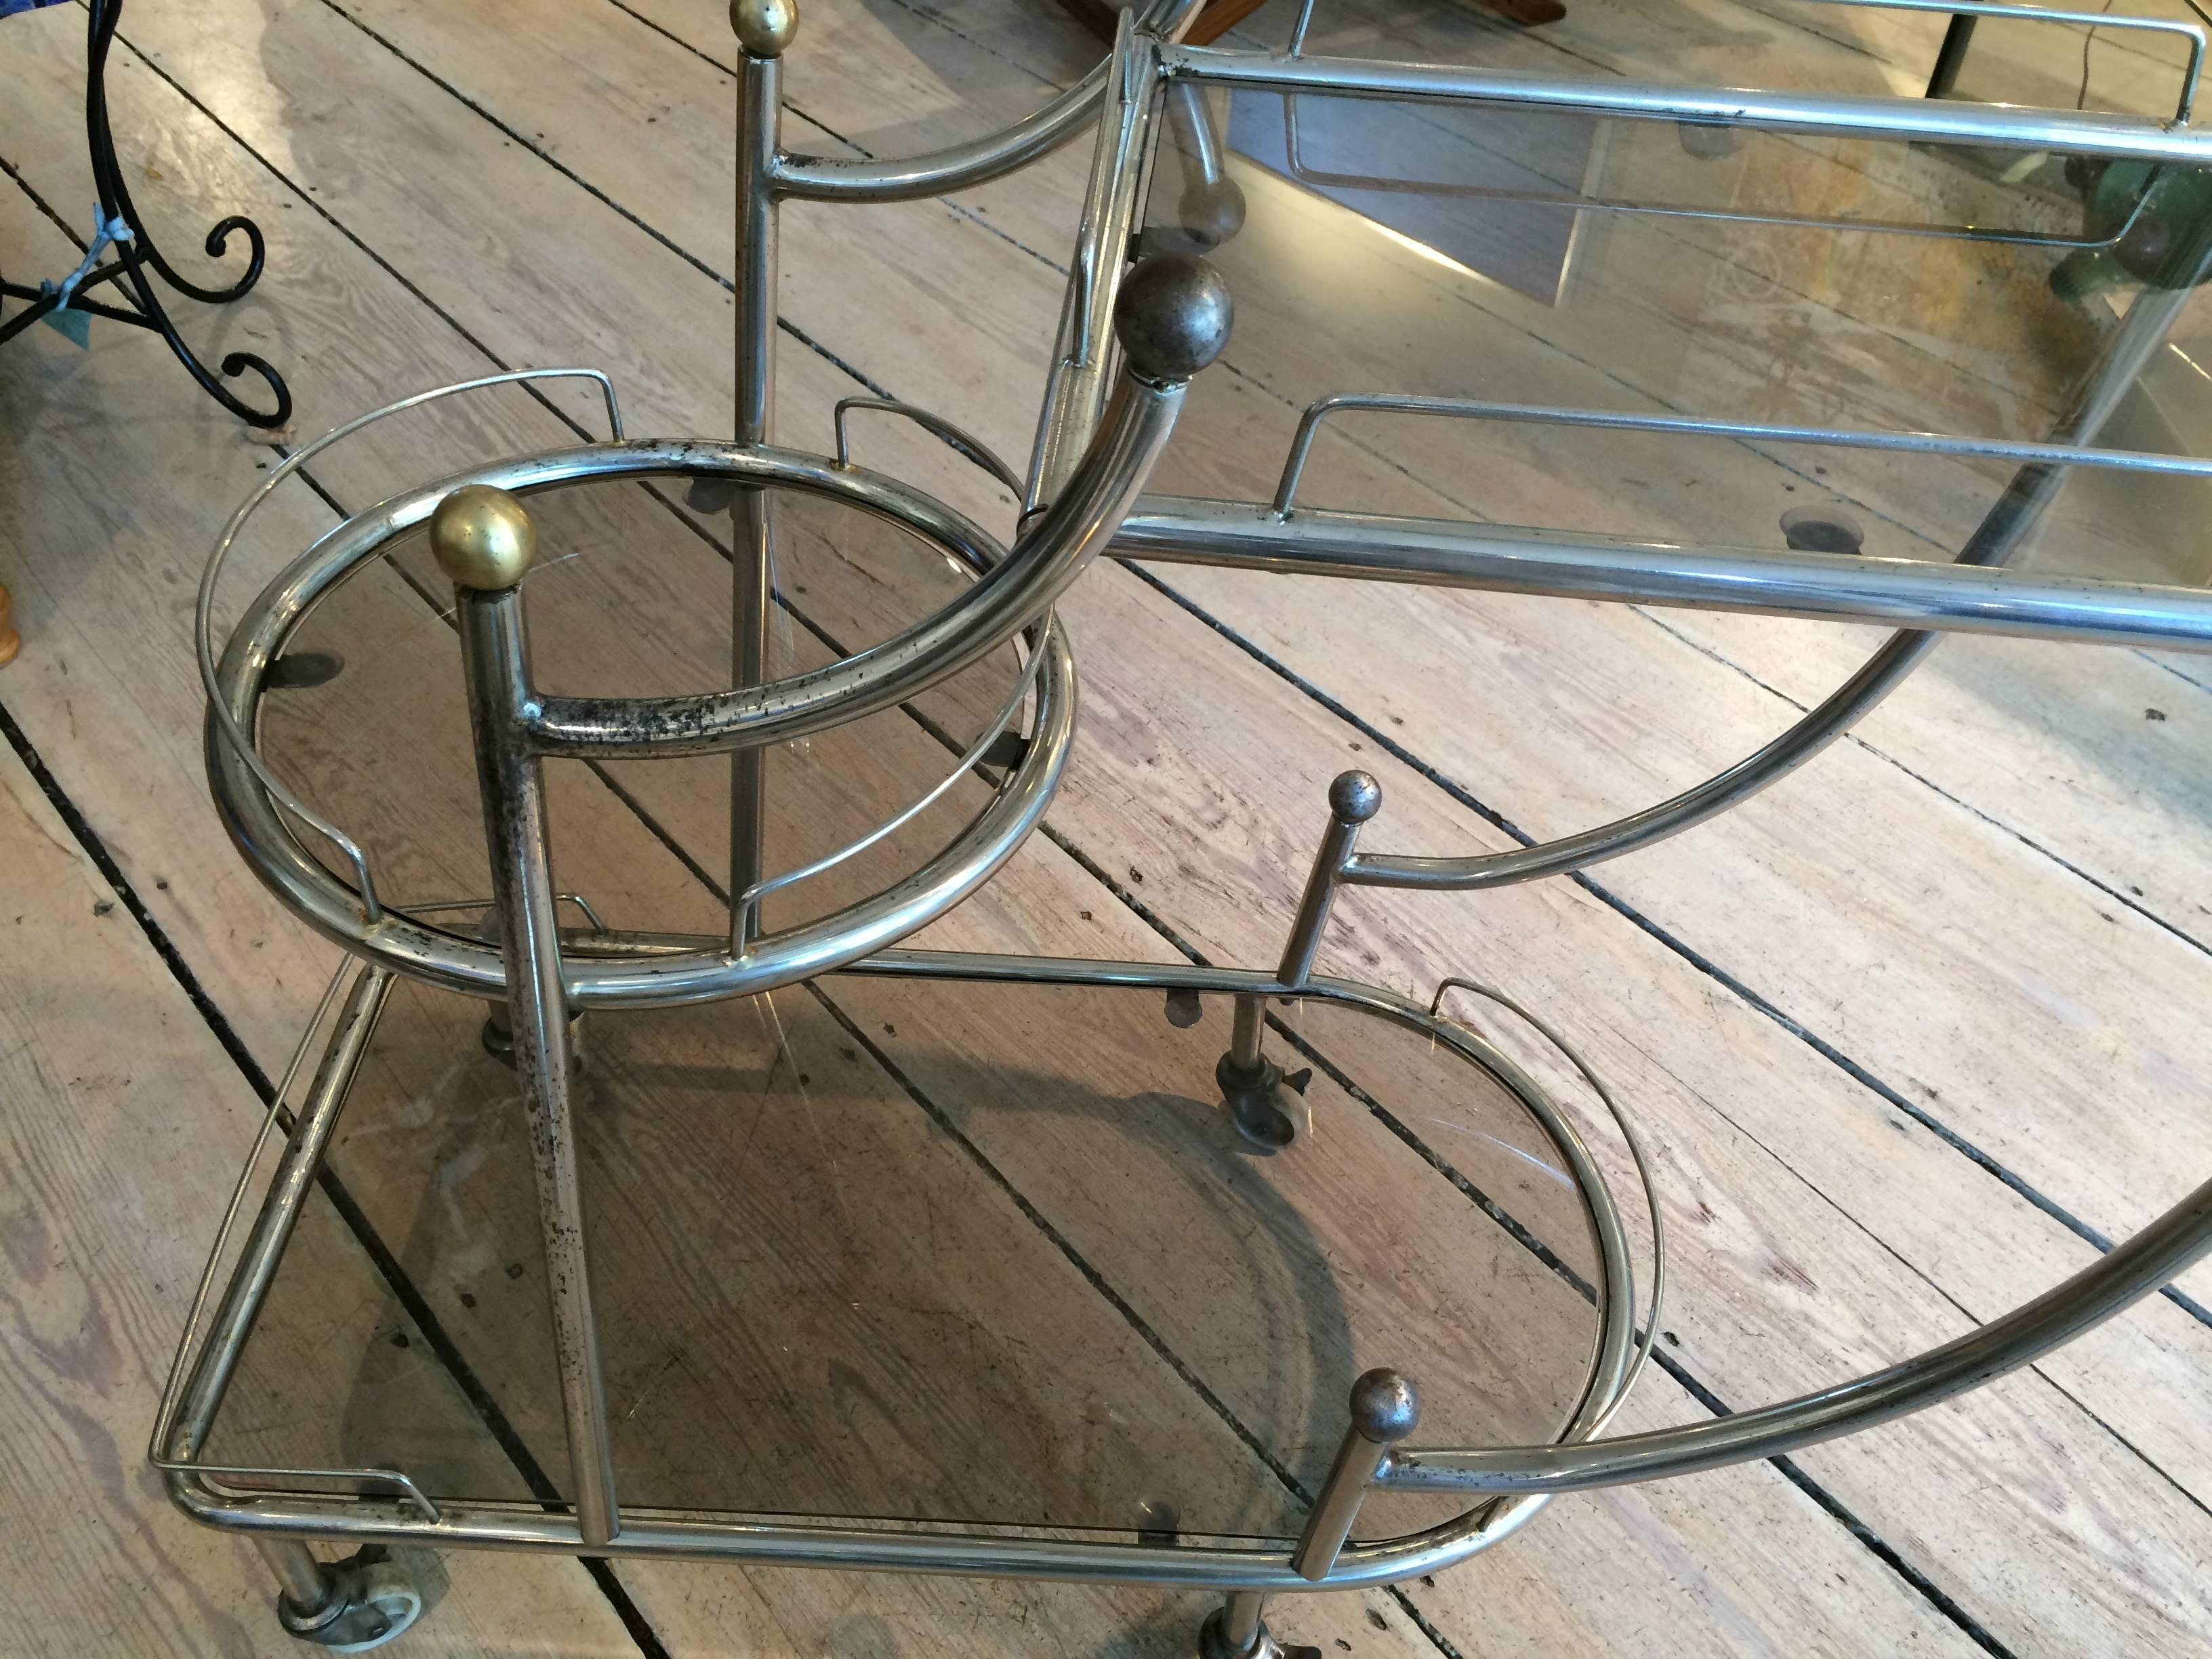 20th Century Mid-Century Modern Steel Bar Cart with Smoked Glass Shelves